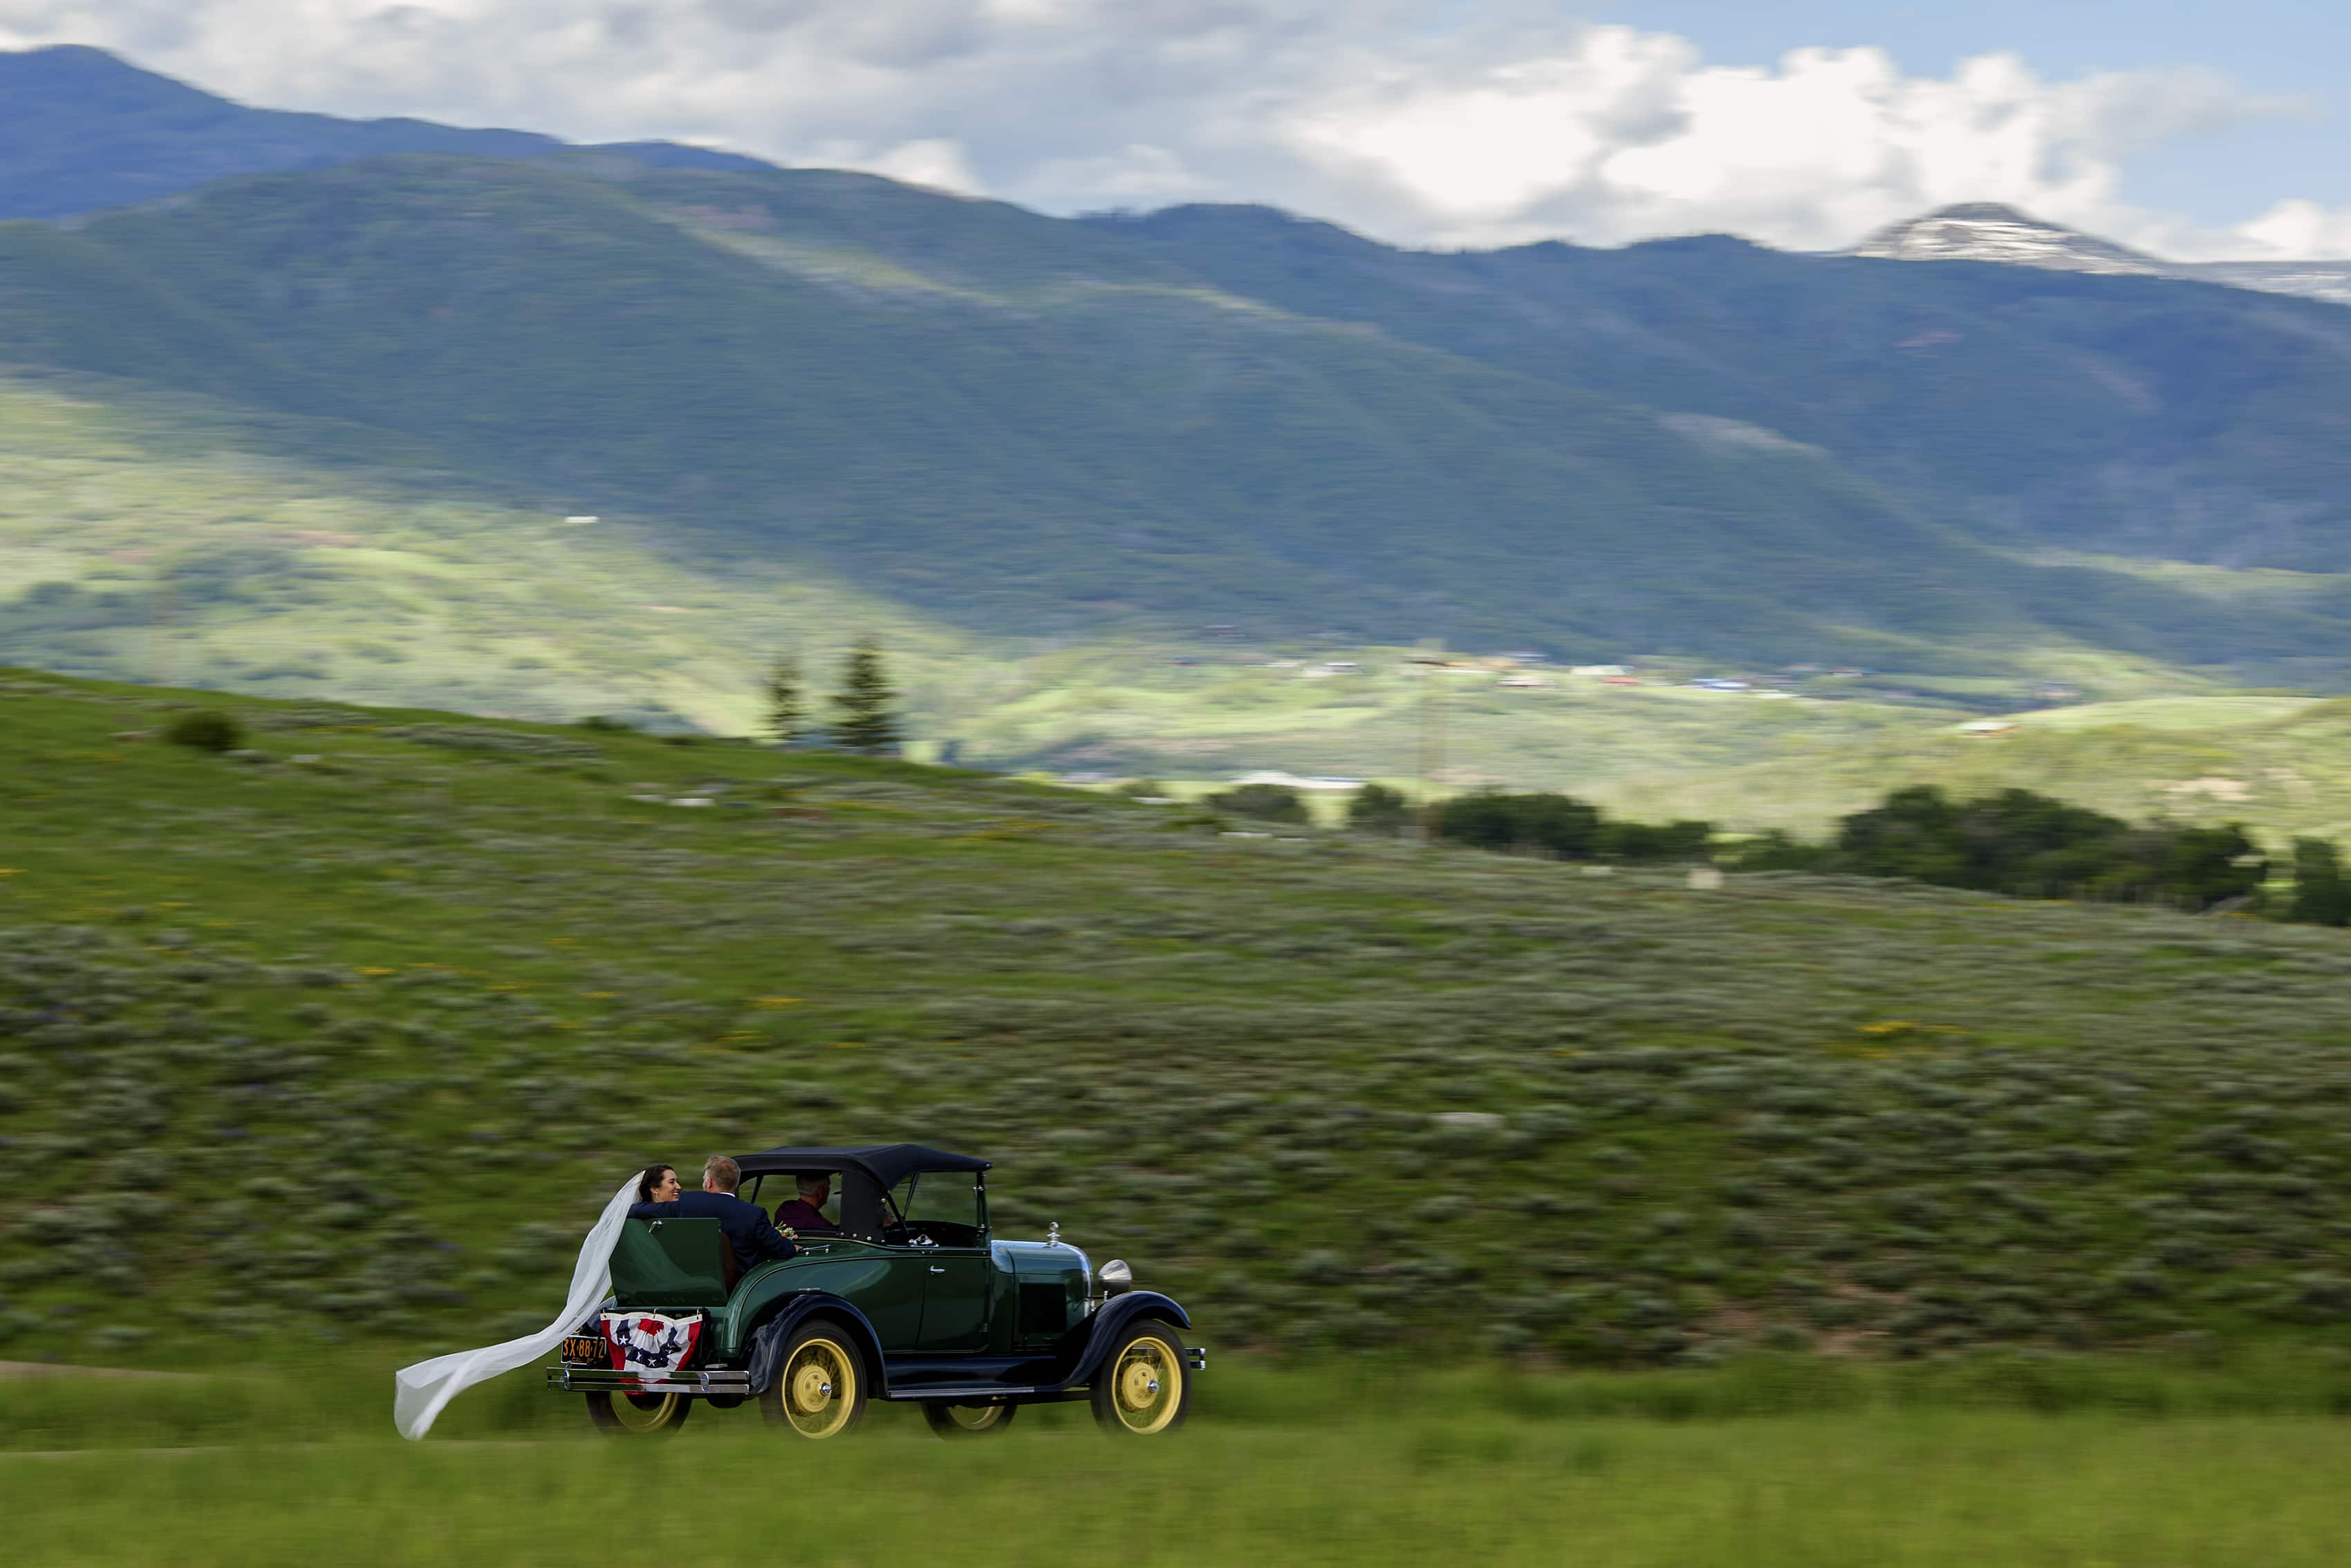 The newlyweds drive away in a Model A vintage car in the hills of Steamboat Springs